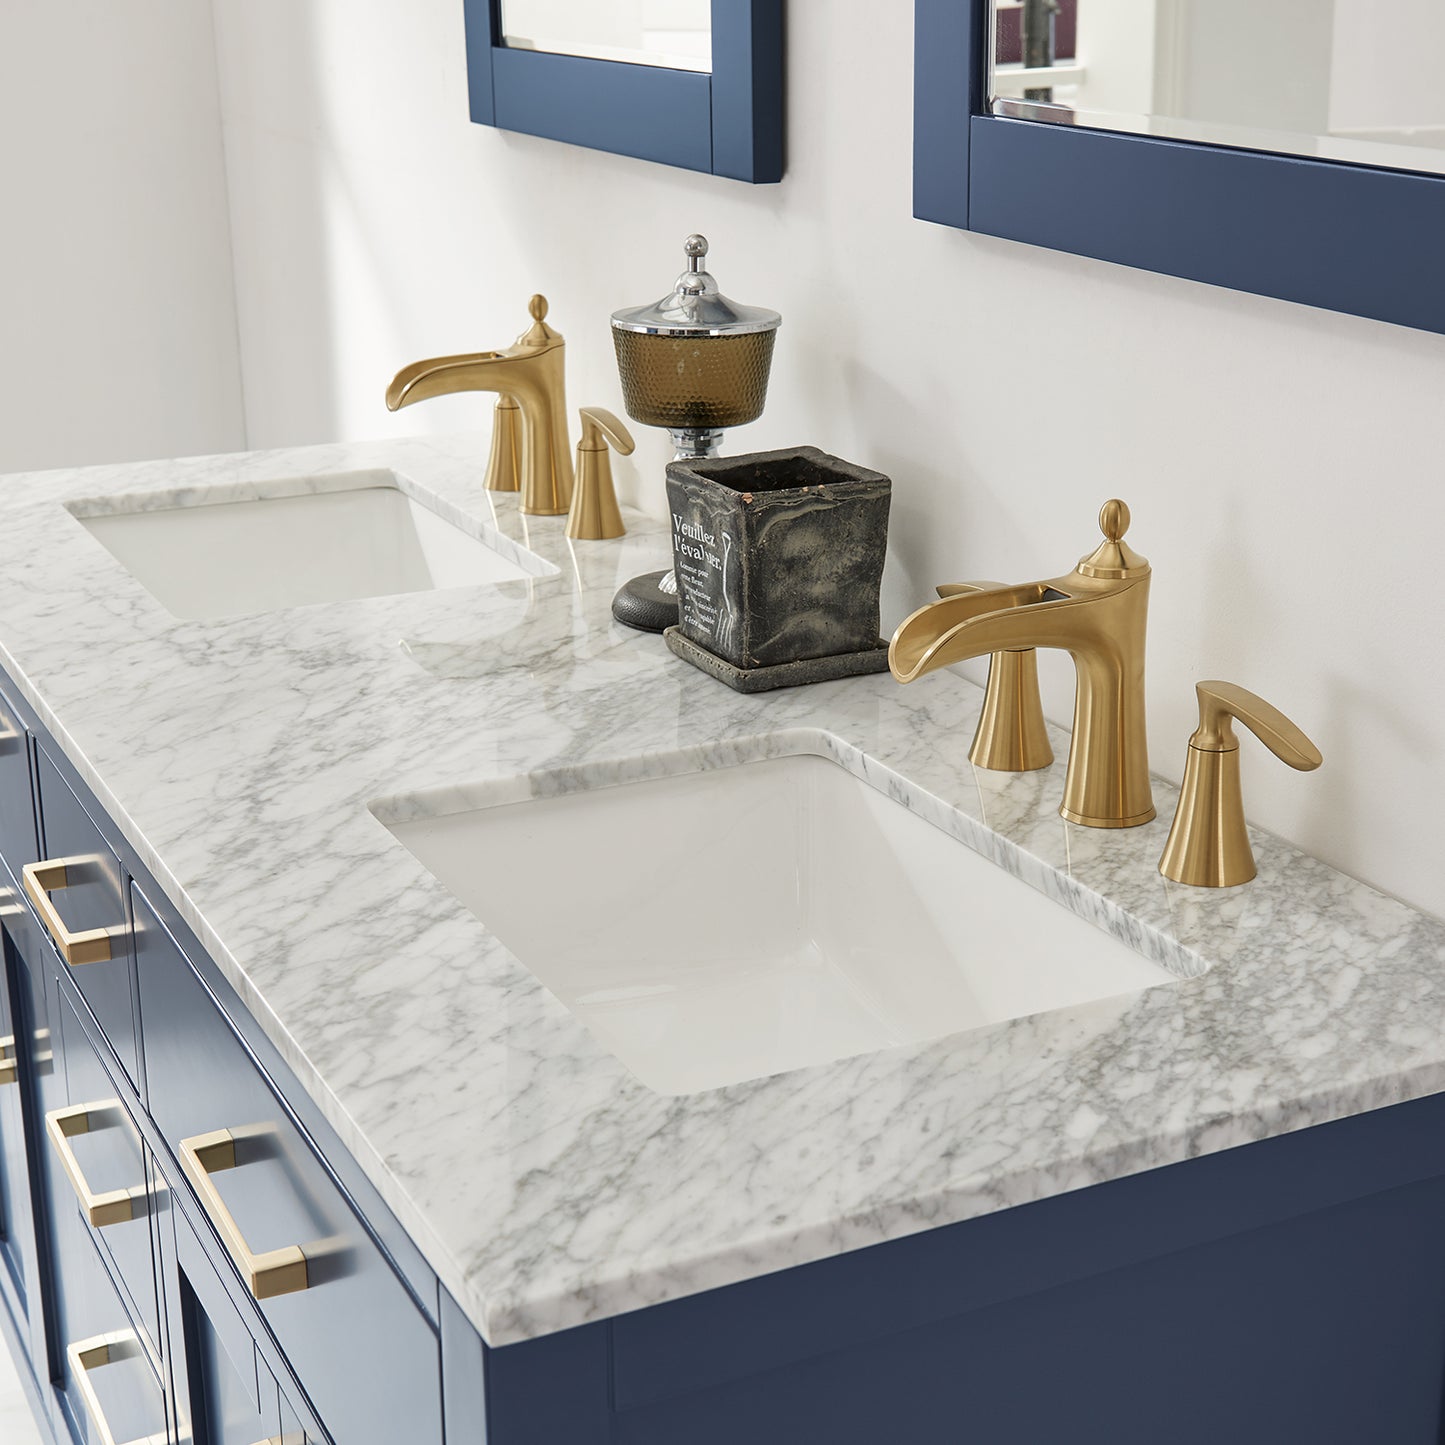 Ivy 60" Double Bathroom Vanity Set with Carrara White Marble Countertop -Altair